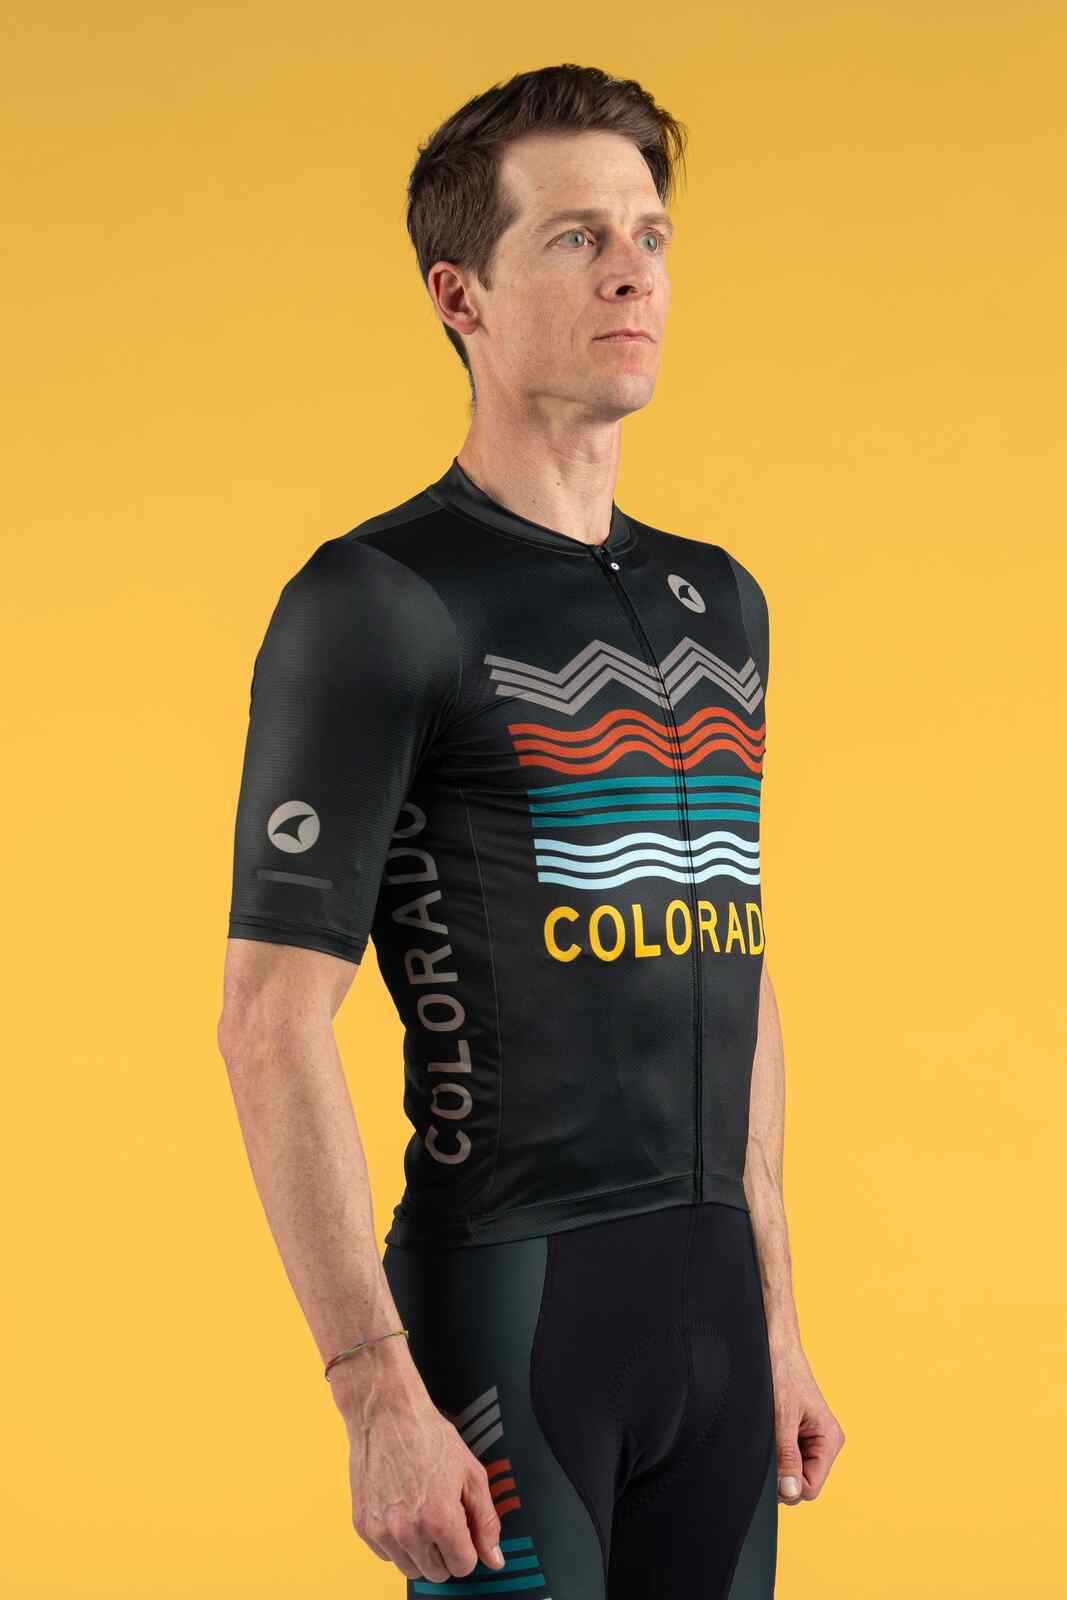 Men's Navy Blue Colorado Cycling Jersey - Front View